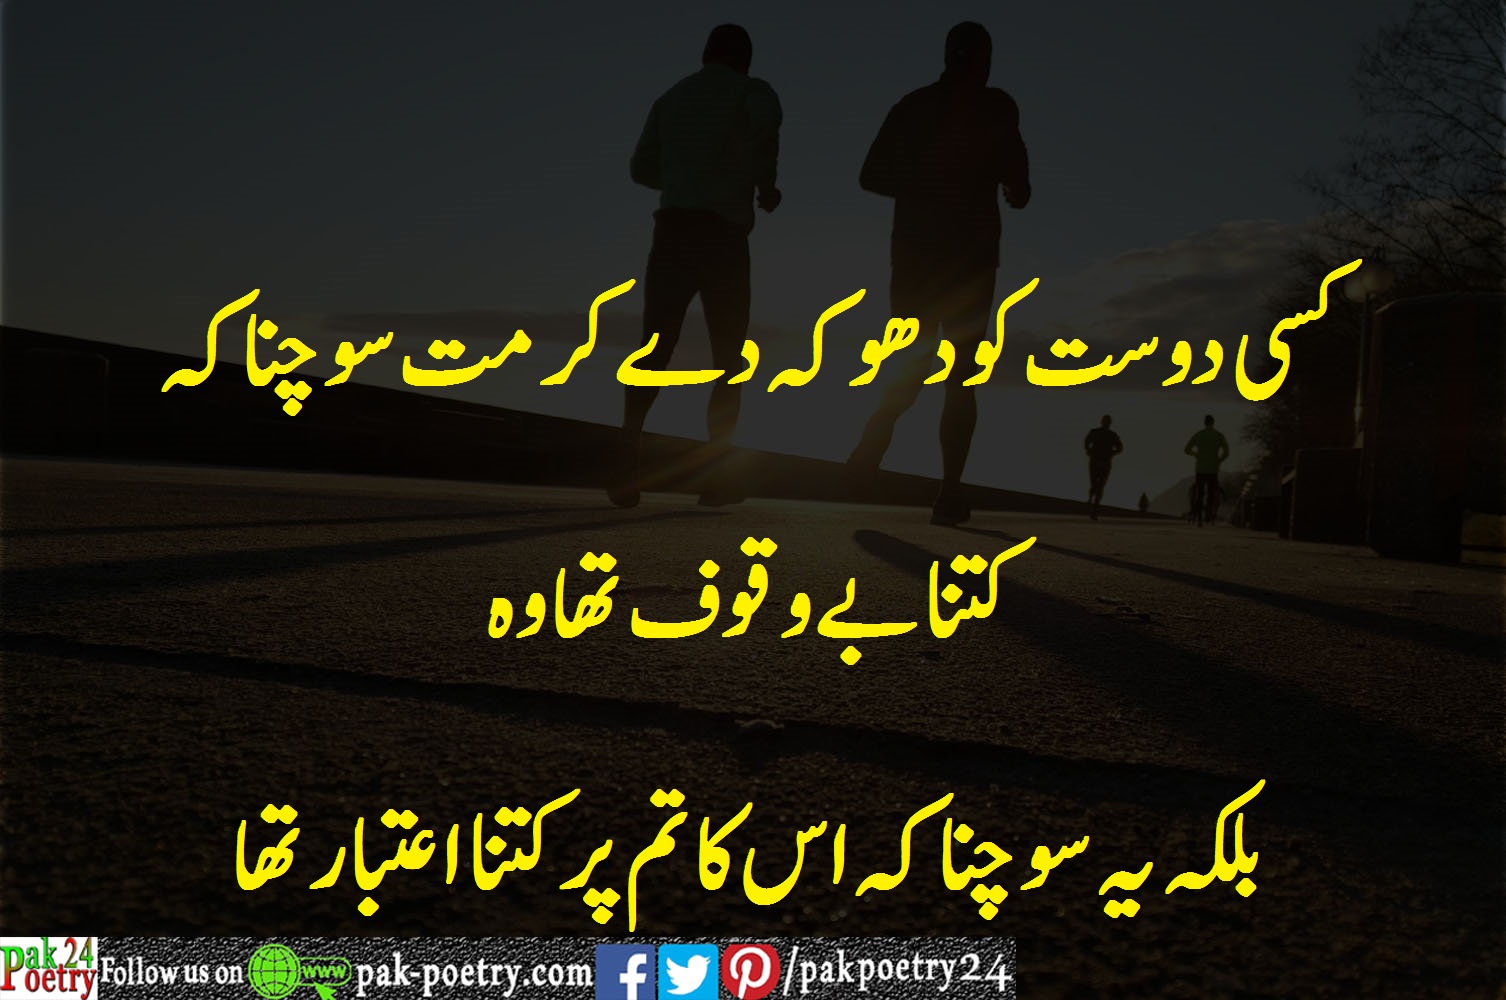 Funny Poetry In Urdu For Friends 2021 Give respect and take respect jpg (1506x1000)